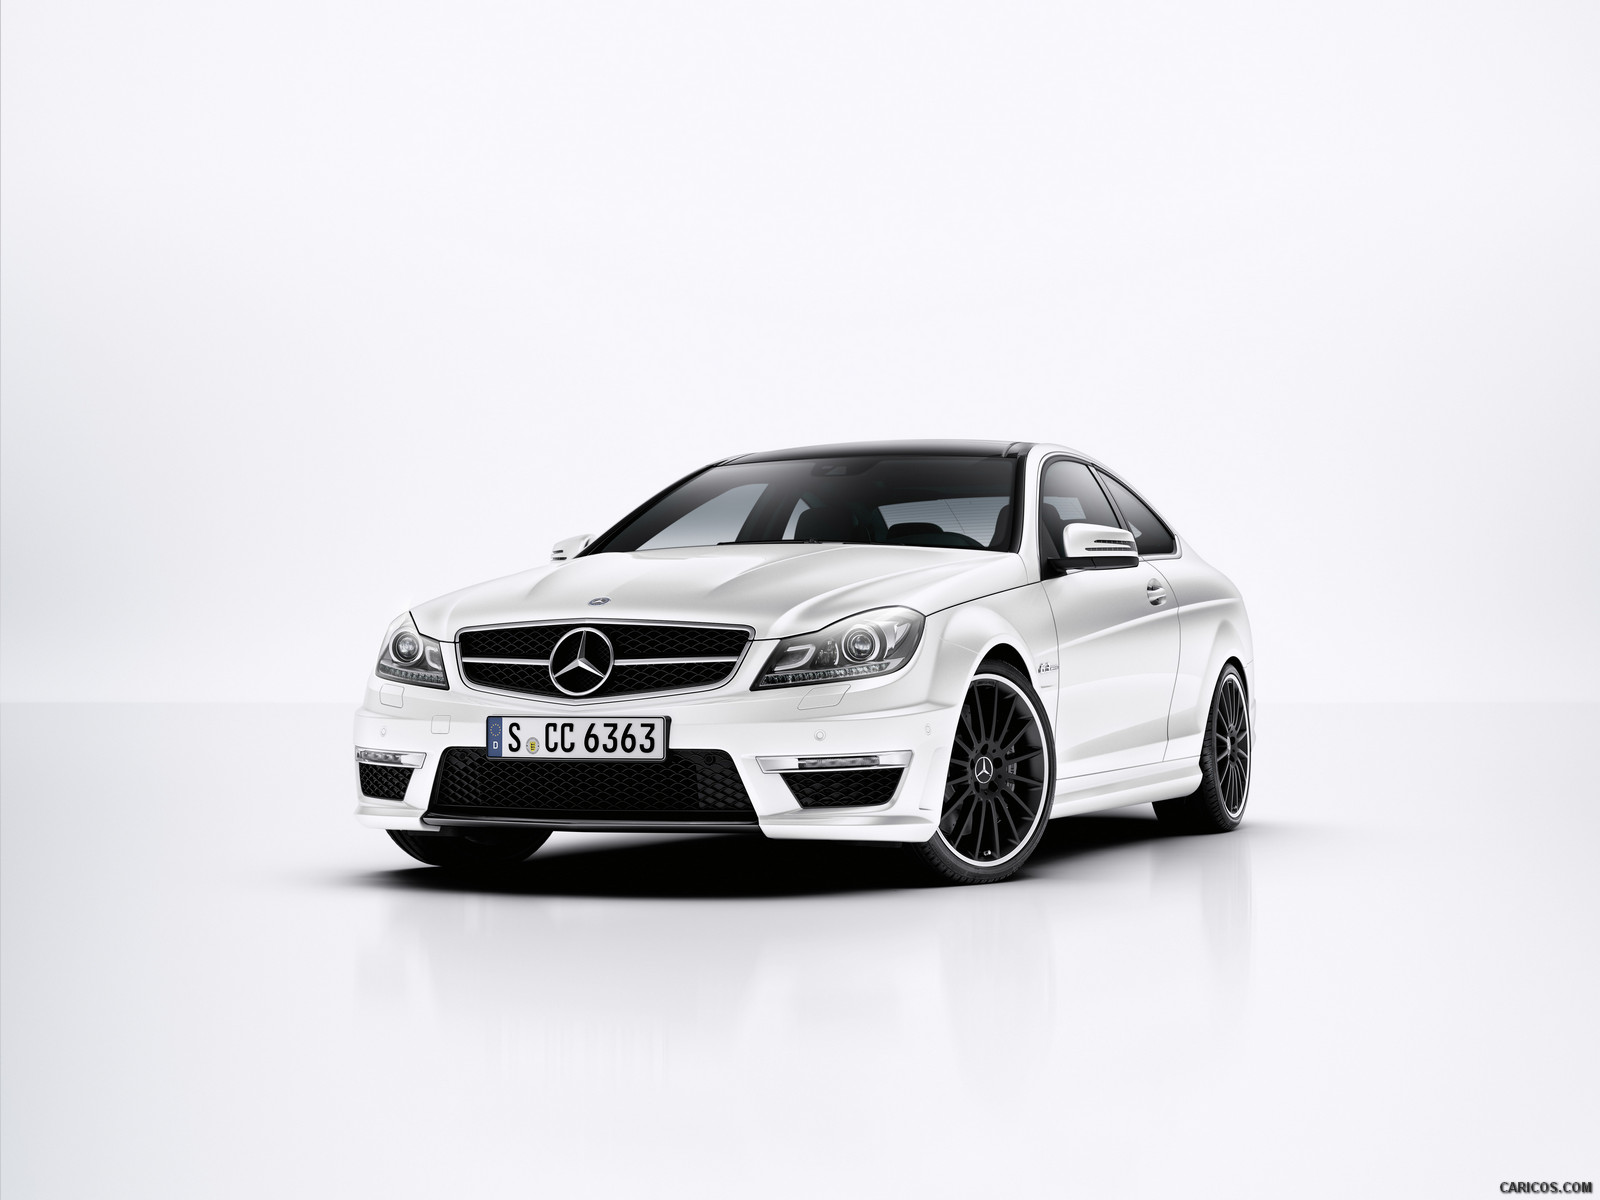 Mercedes-Benz C63 AMG Coupe (2012)  - Front, #62 of 64